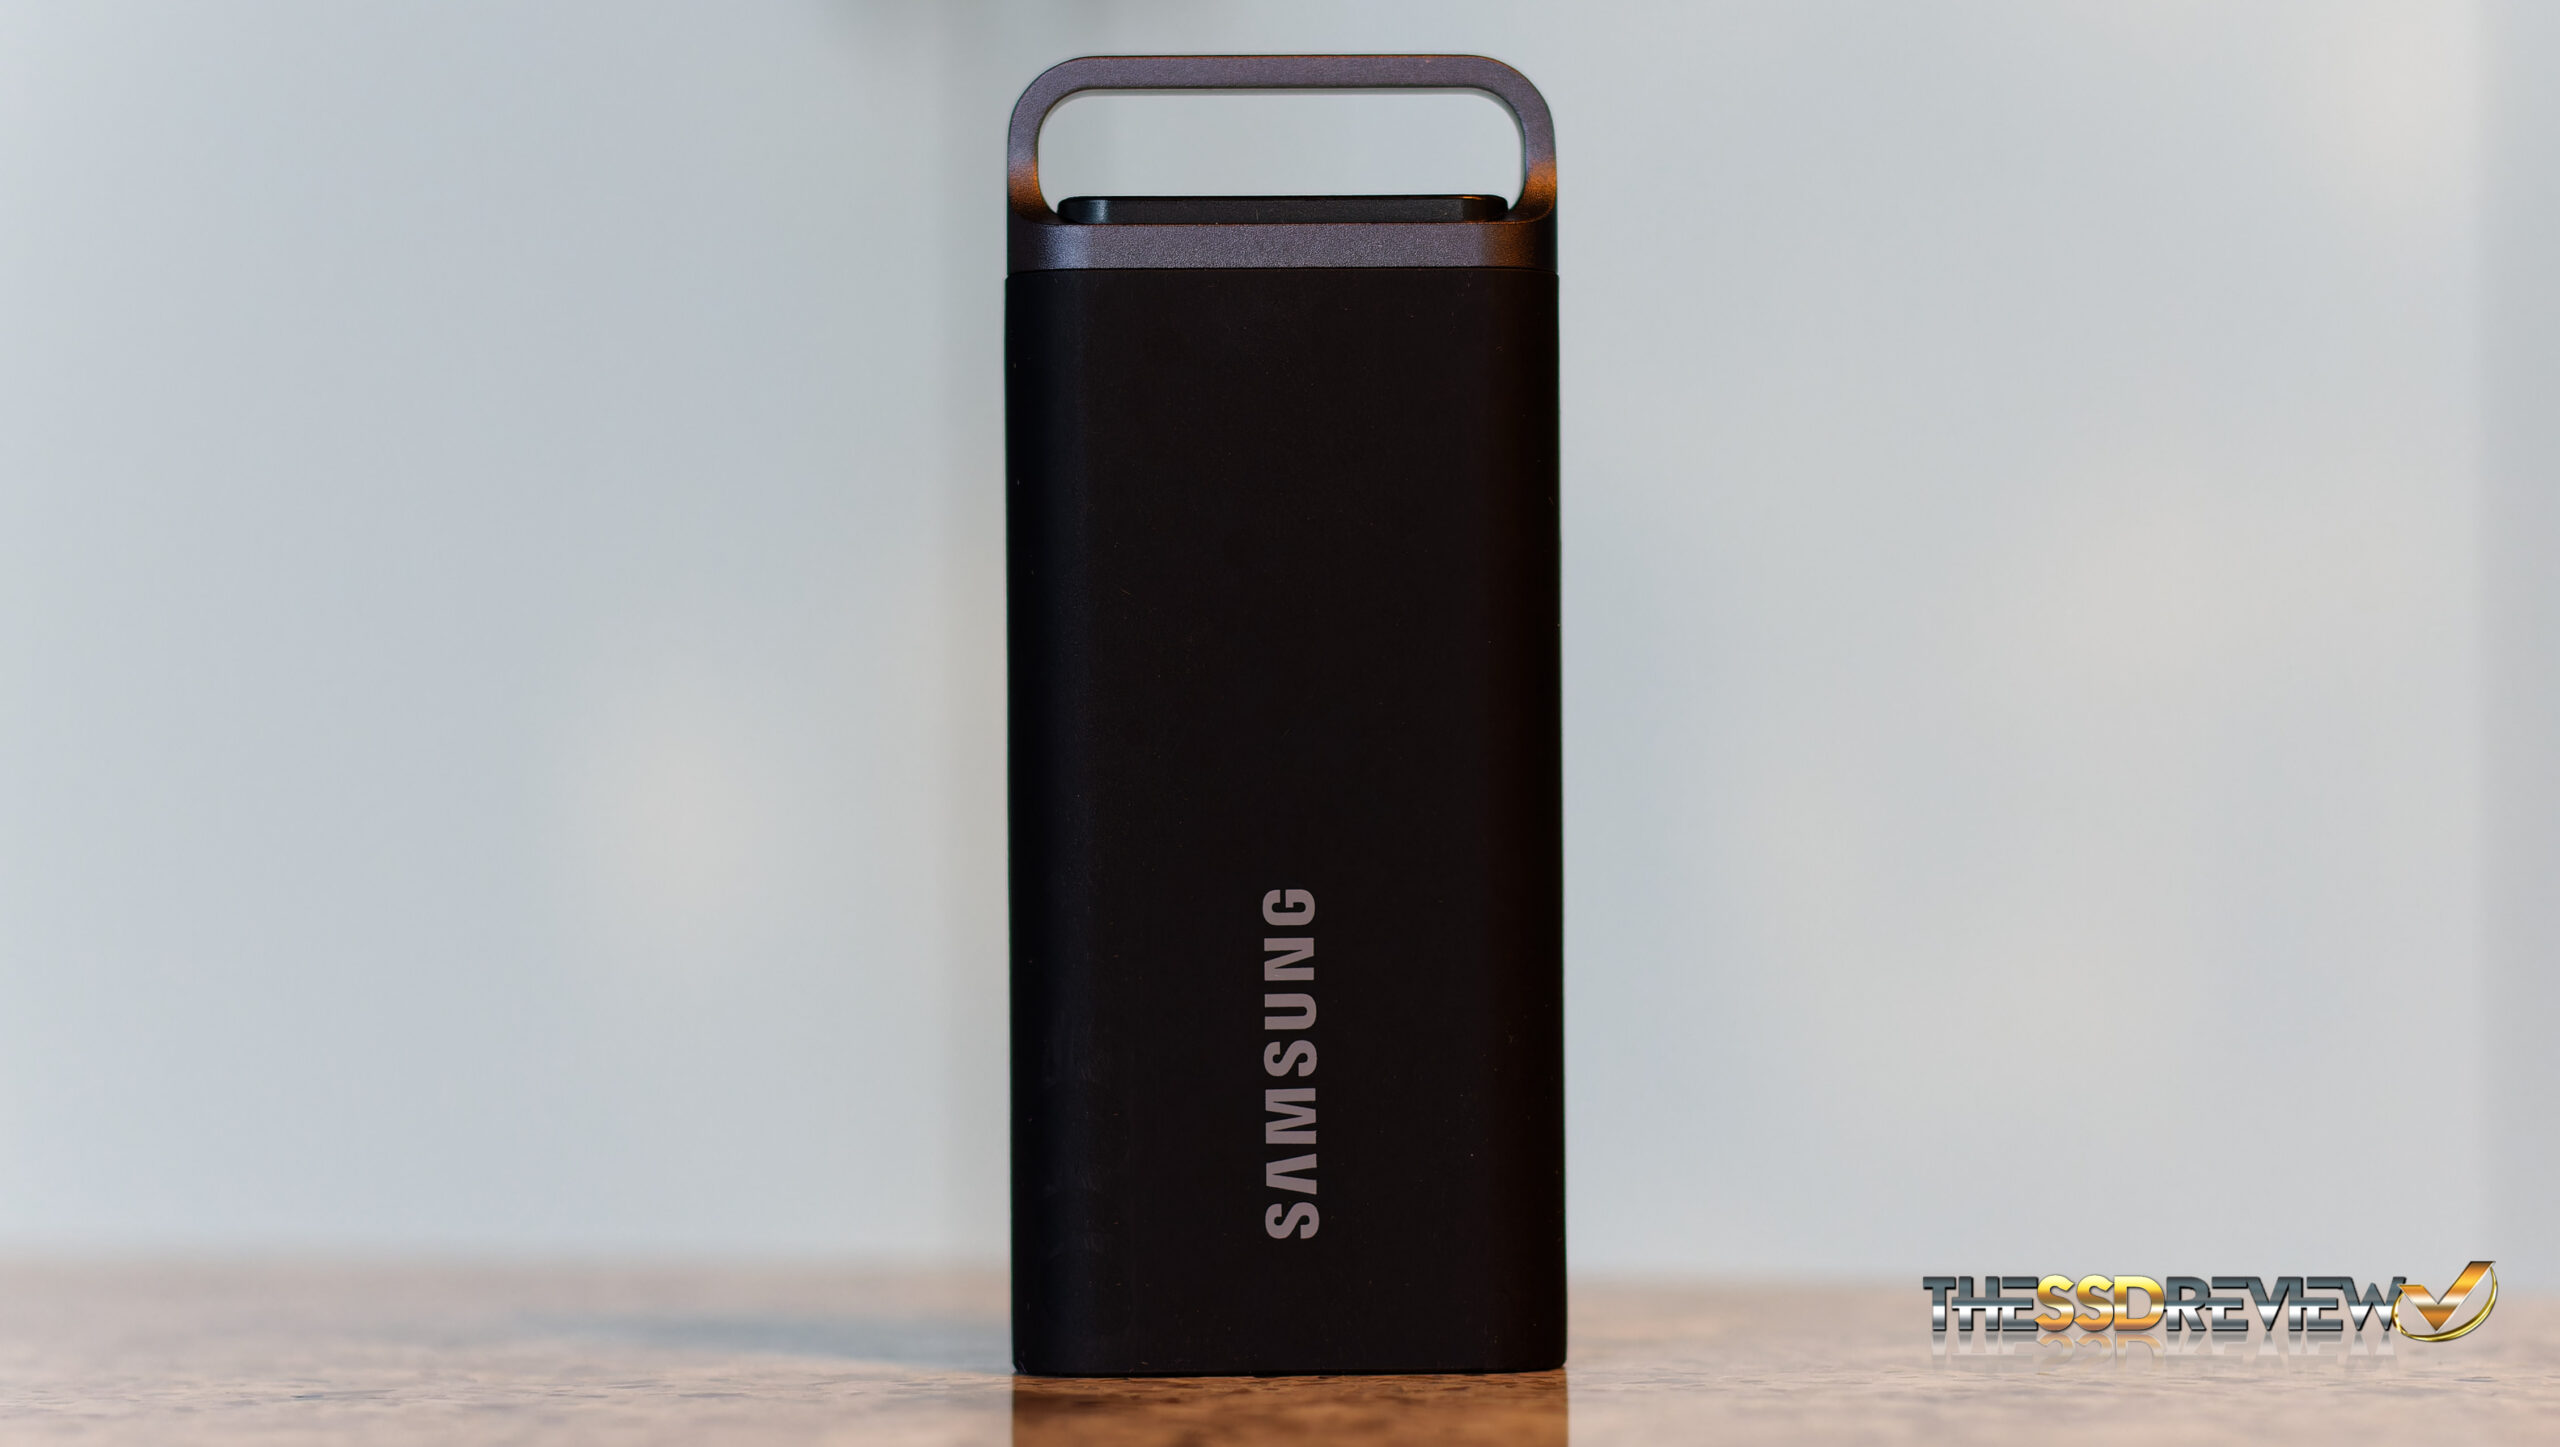 Samsung Releases T5 EVO Portable SSD with Up to 8 TB of Storage Capacity